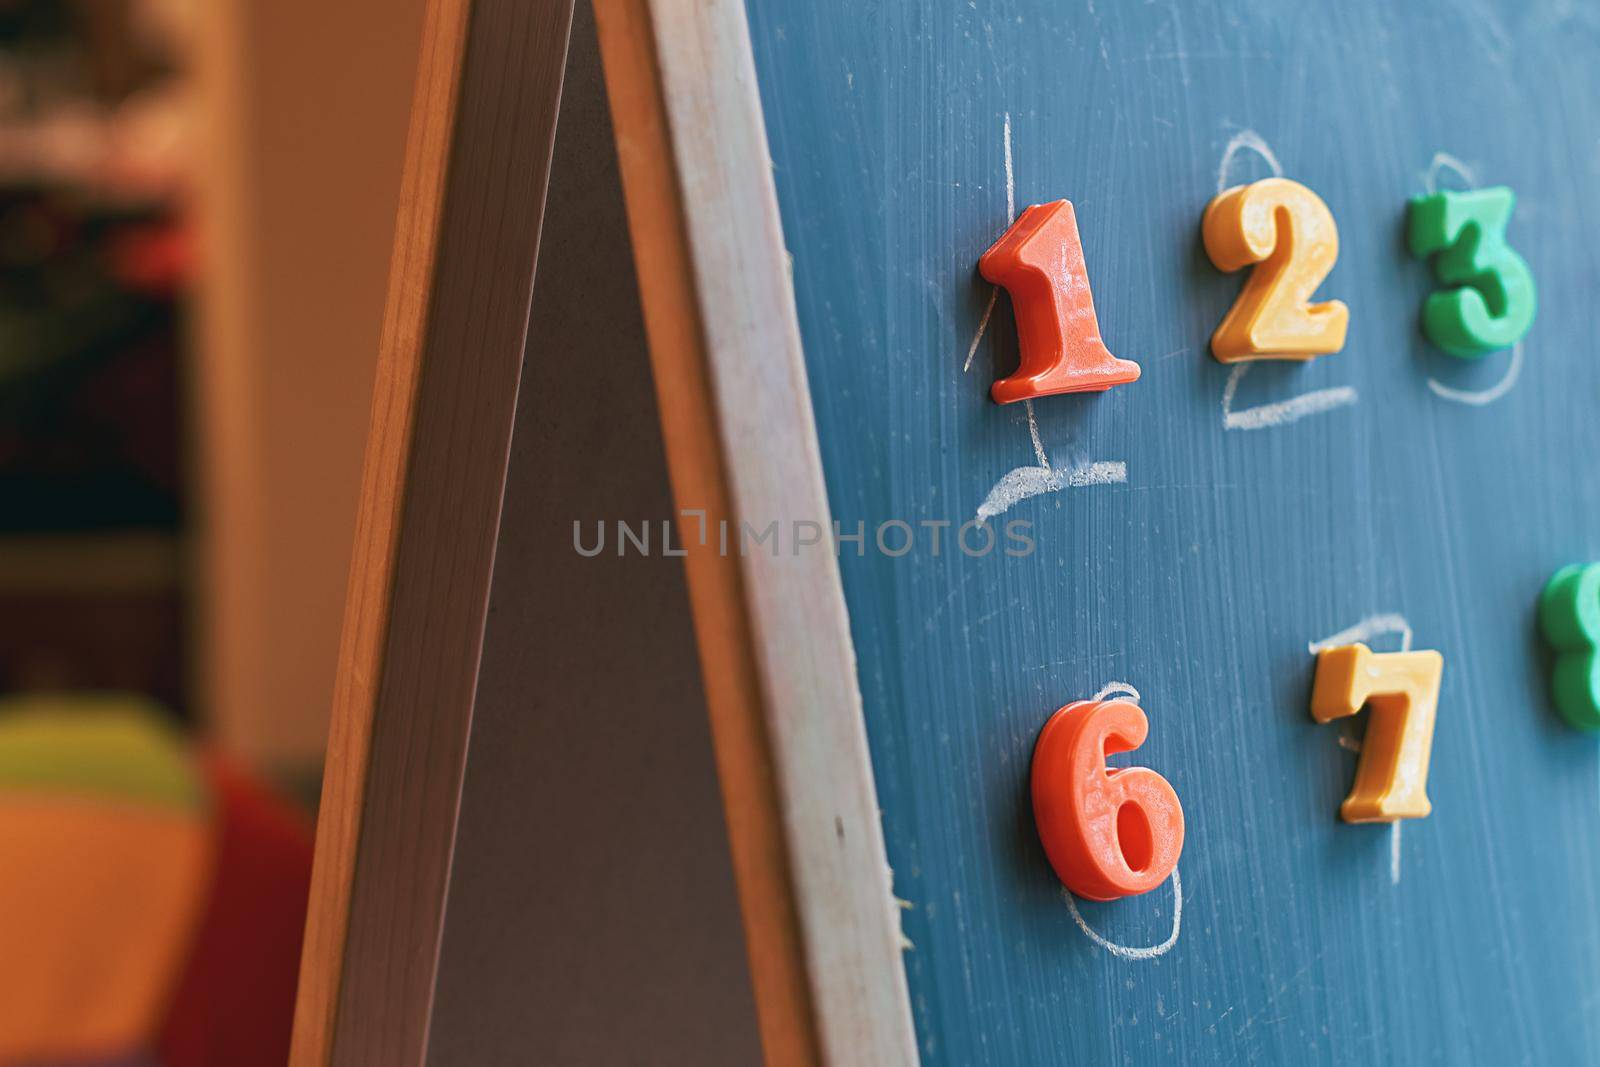 Learning numbers on a blackboard with colorful magnets and handwriting on blackboard during homeschooling. Quarantine lifestyle concept.